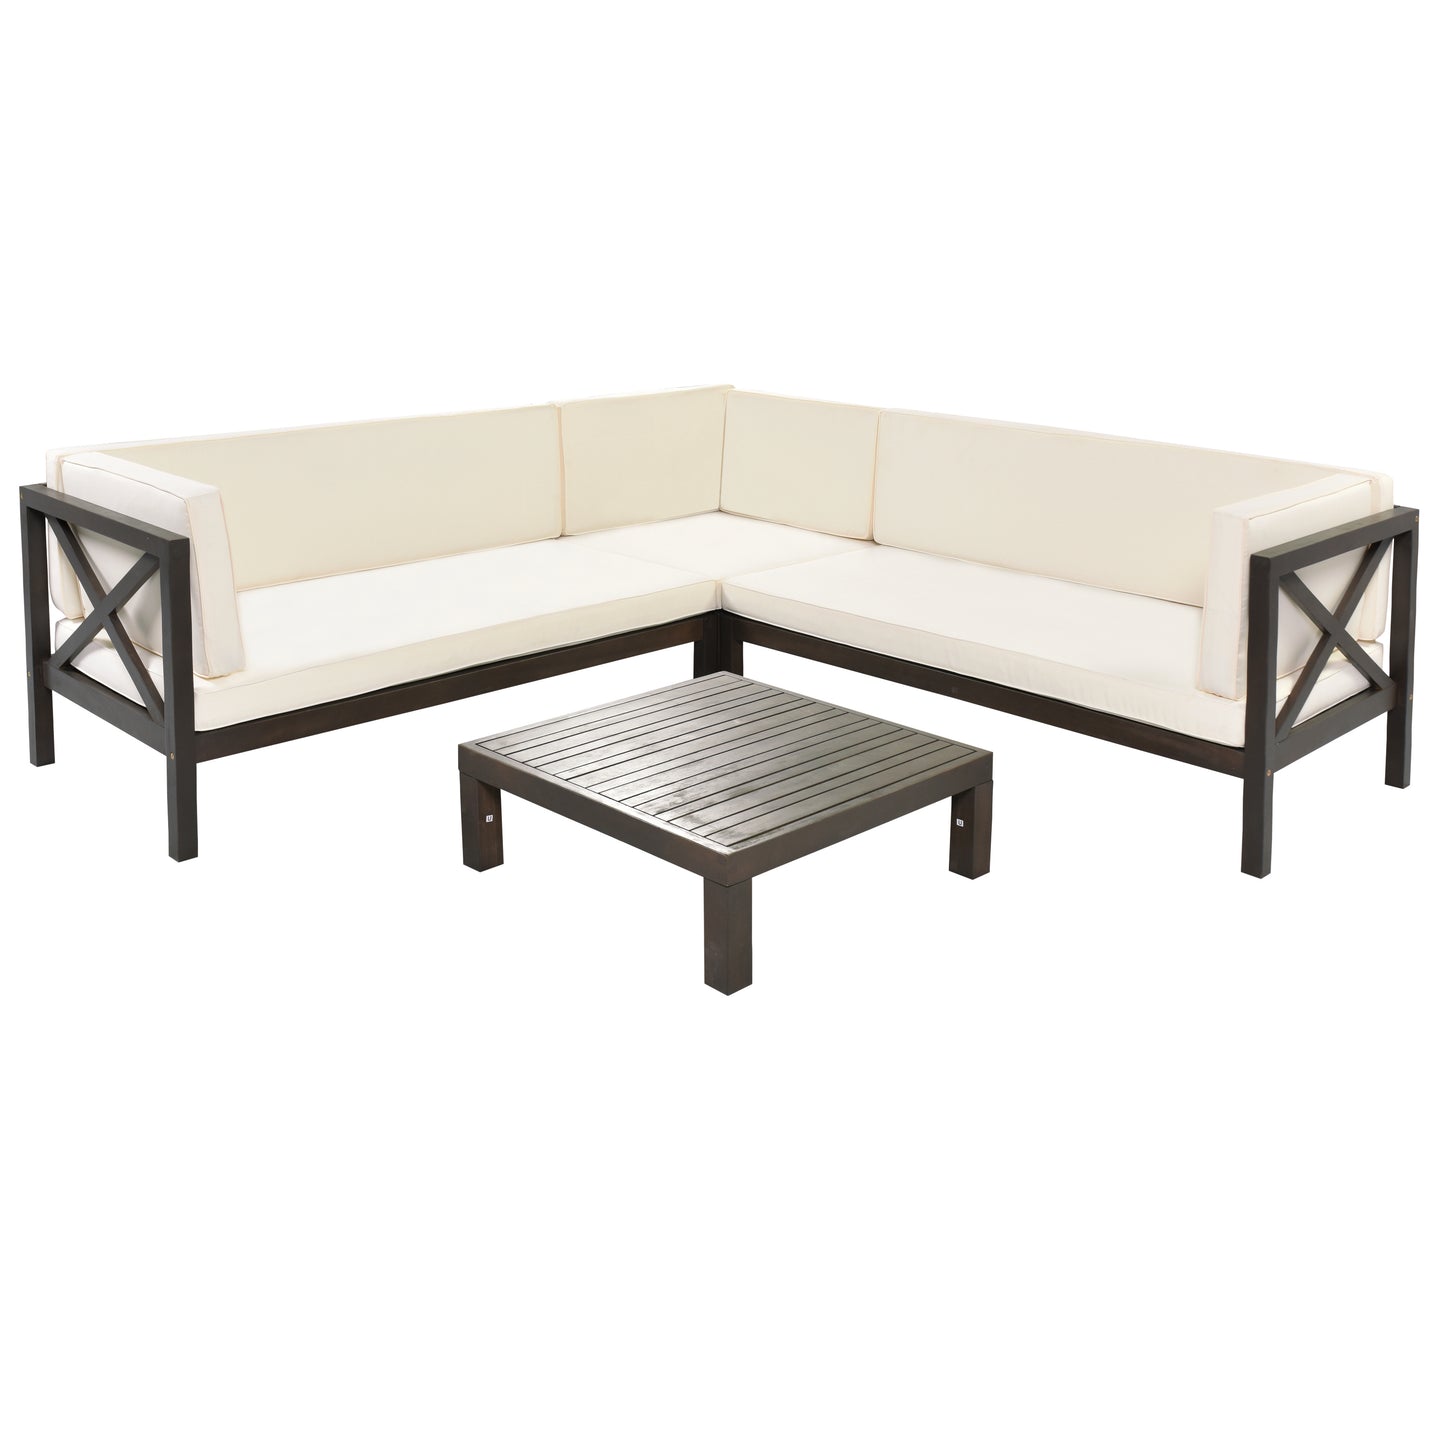 TOPMAX Outdoor Wood Patio Backyard 4-Piece Sectional Seating Group with Cushions and Table X-Back Sofa Set for Small Places, Brown Finish+Beige Cushions